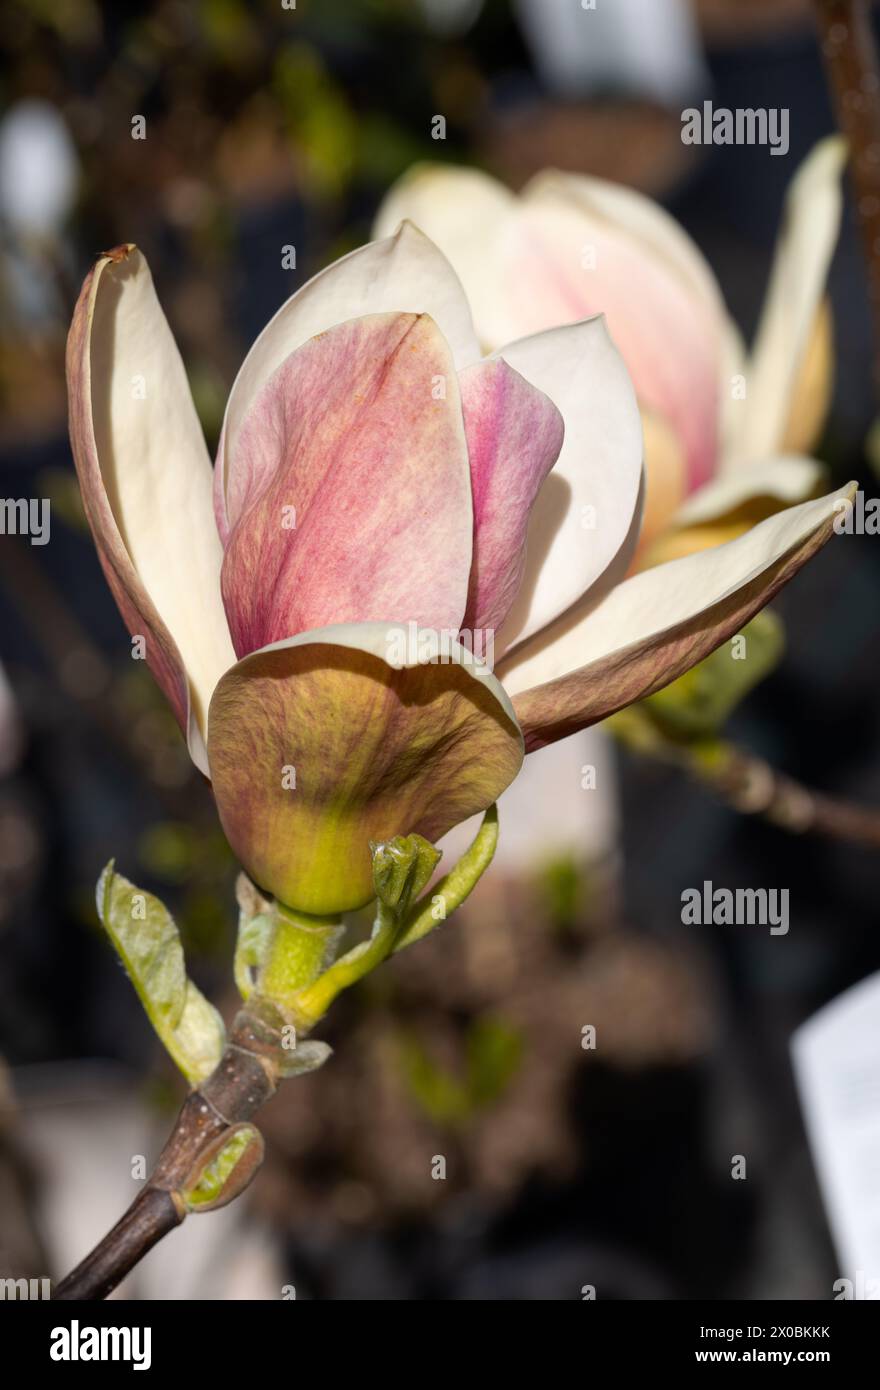 Beautiful pink magnolia flowers on tree. Magnolia blooms in spring garden Blooming magnolia, tulip tree. Magnolia Sulanjana close-up spring background Stock Photo